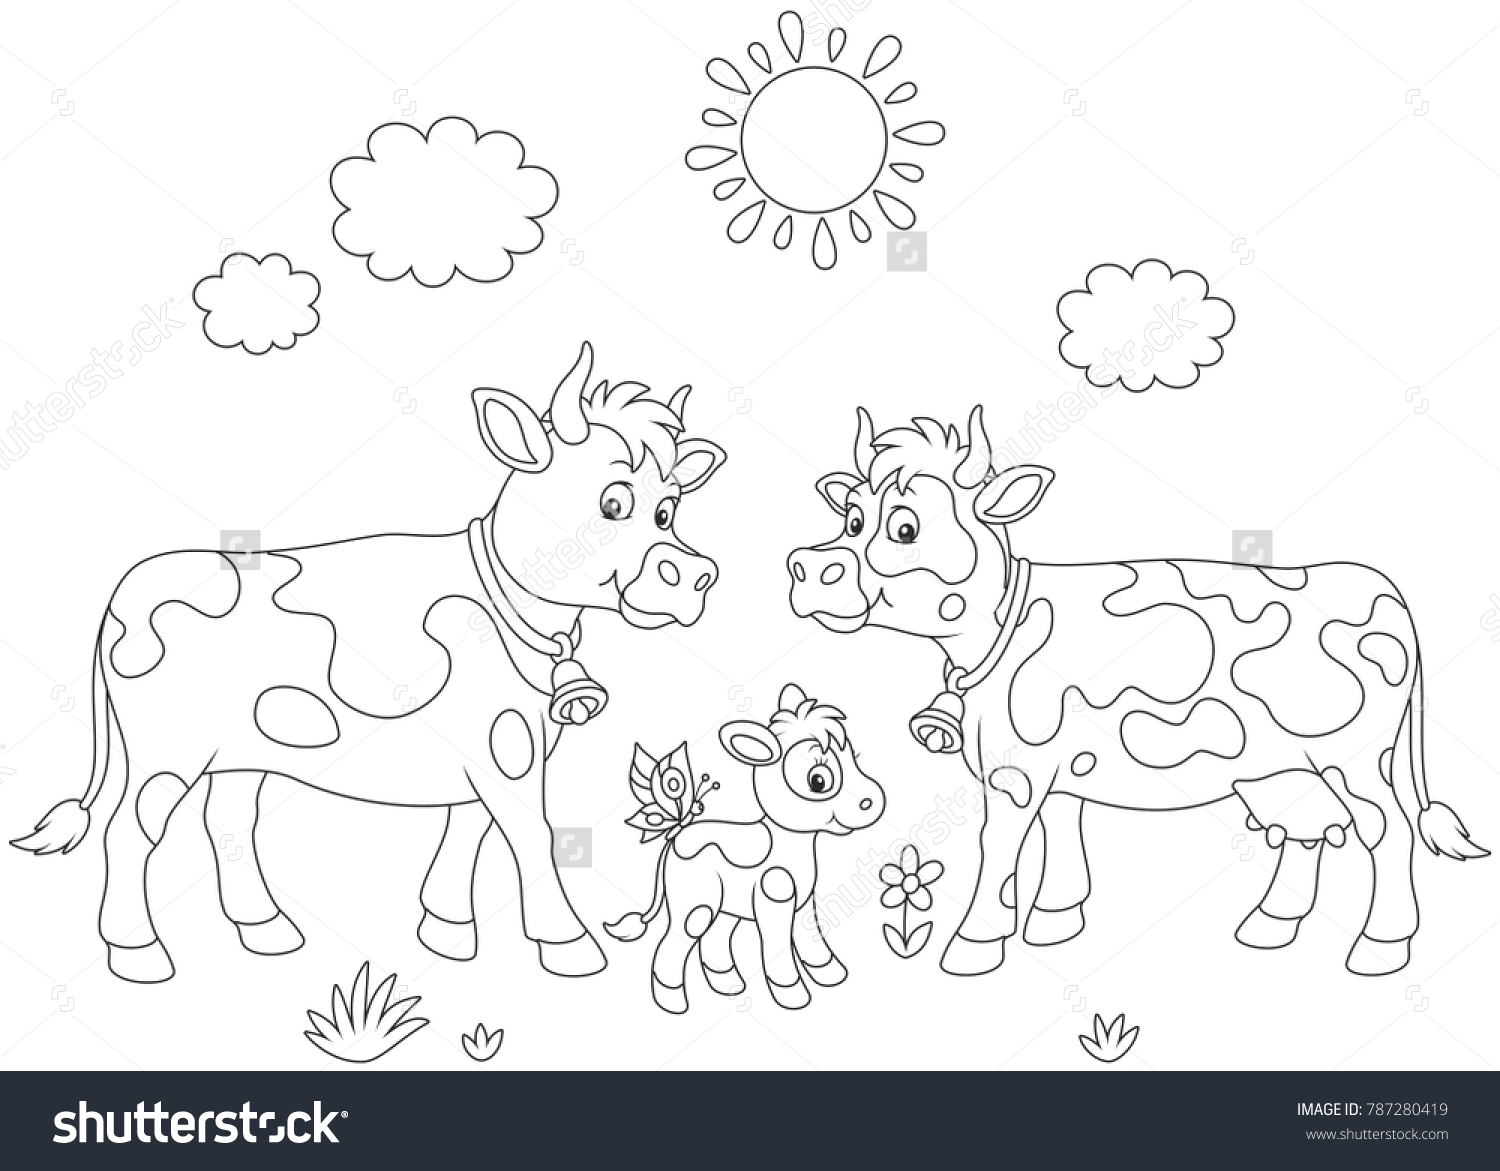 Spotted Cow Bull Small Calf Black Stock Vector (Royalty Free) 787280419 ...